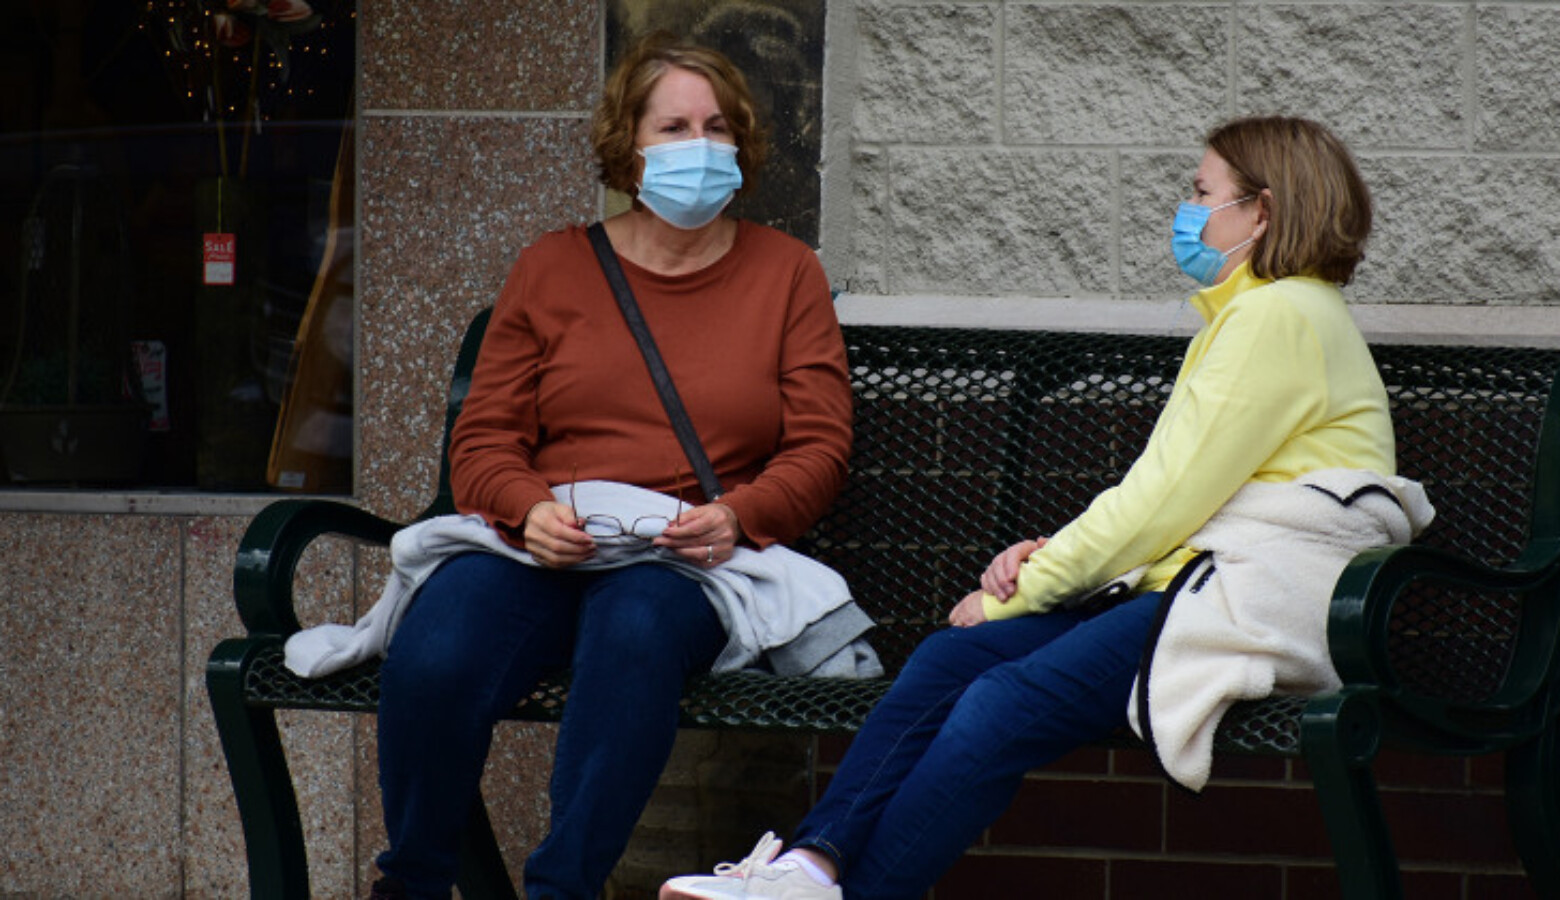 New guidance from the CDC recommends all individuals wear masks indoors in areas where cases are surging.